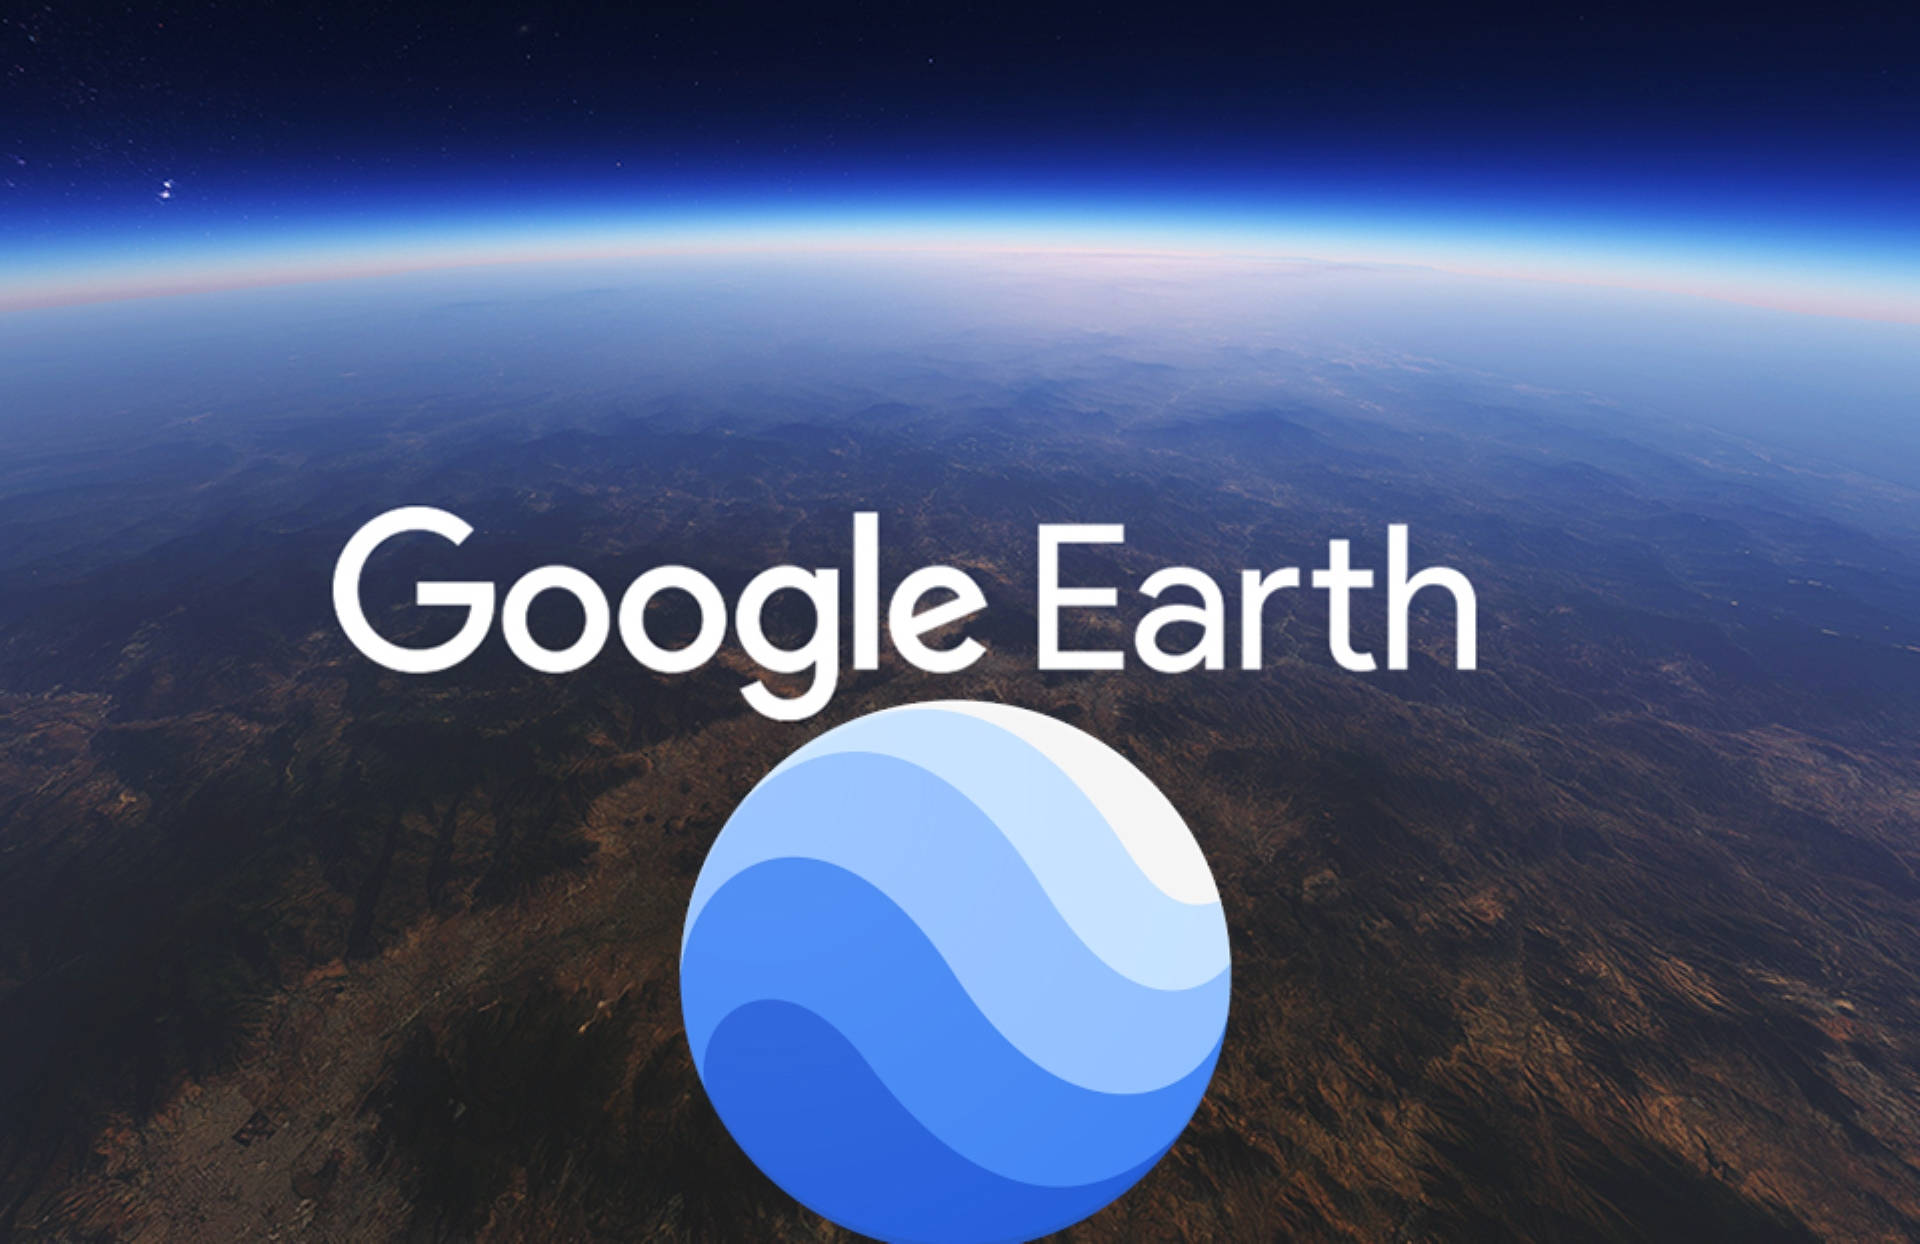 Free Google Earth Wallpaper Downloads, [100+] Google Earth Wallpapers for  FREE 